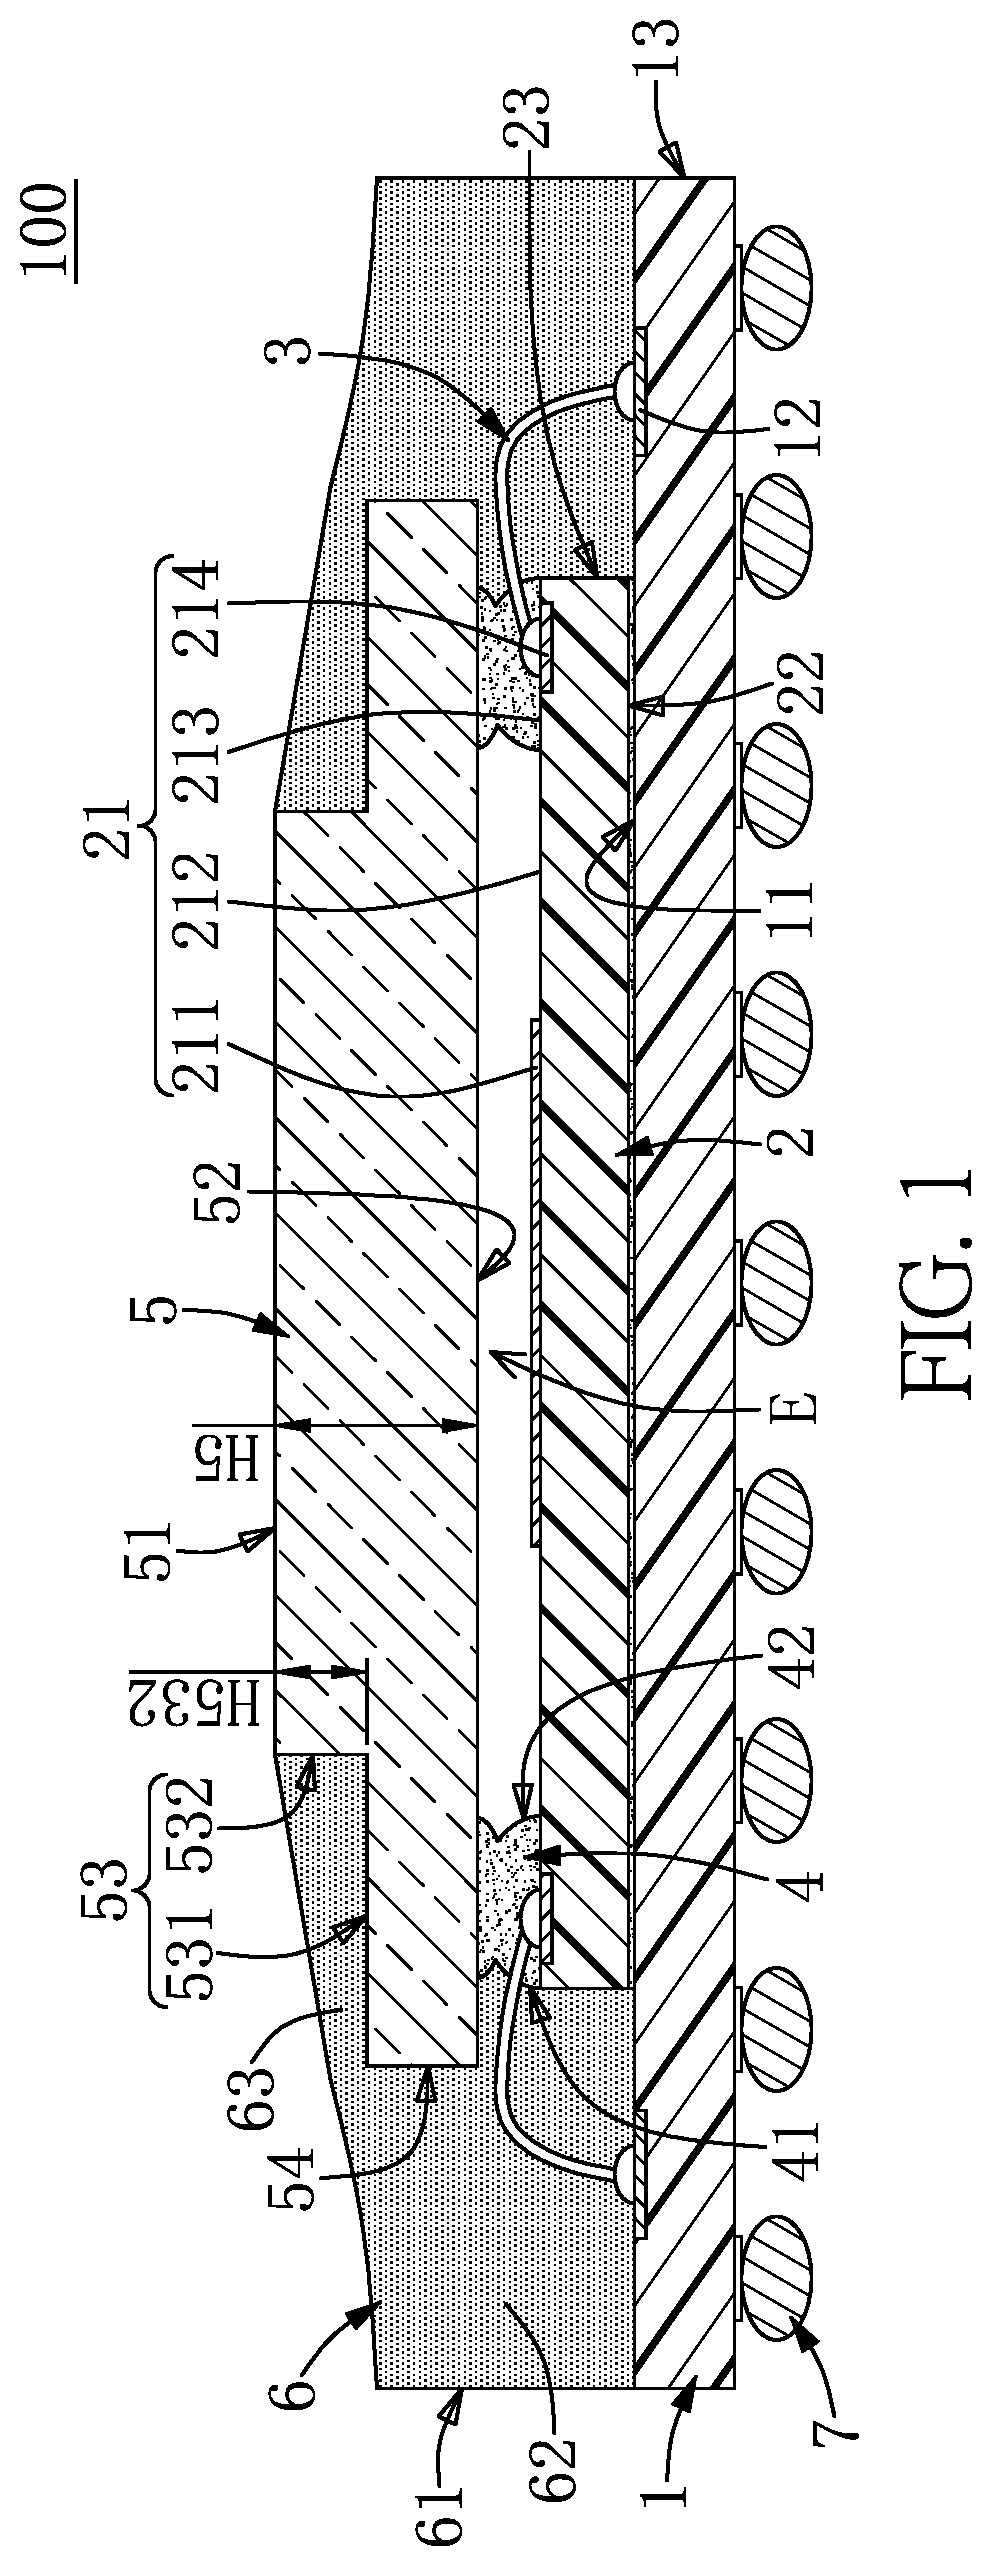 Sensor package structure